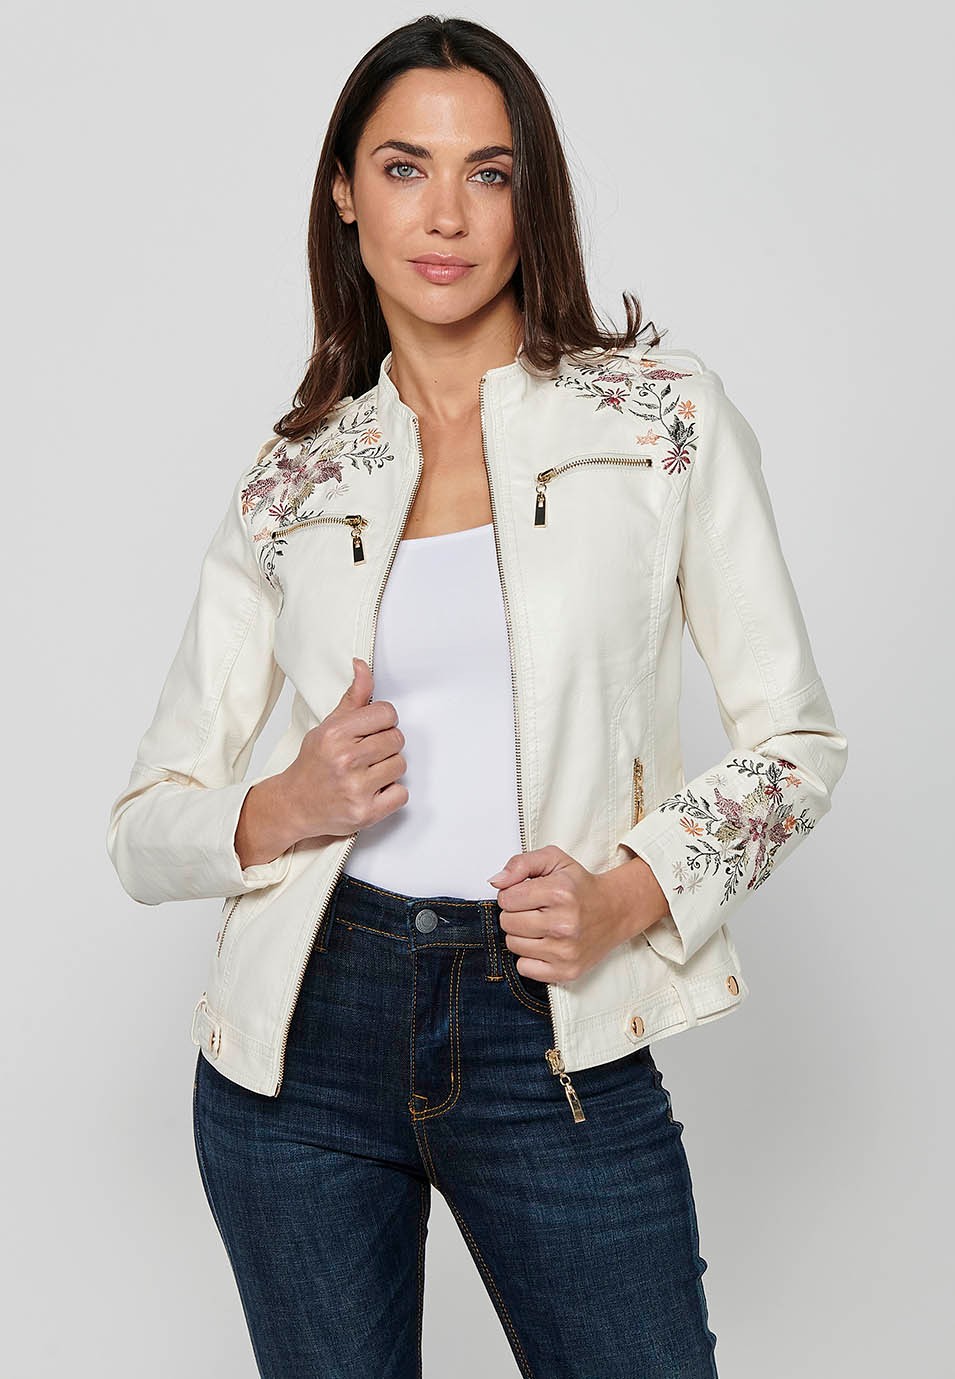 Leather-effect jacket with front zipper closure with floral embroidered details with round neck and front pockets in ecru color for women